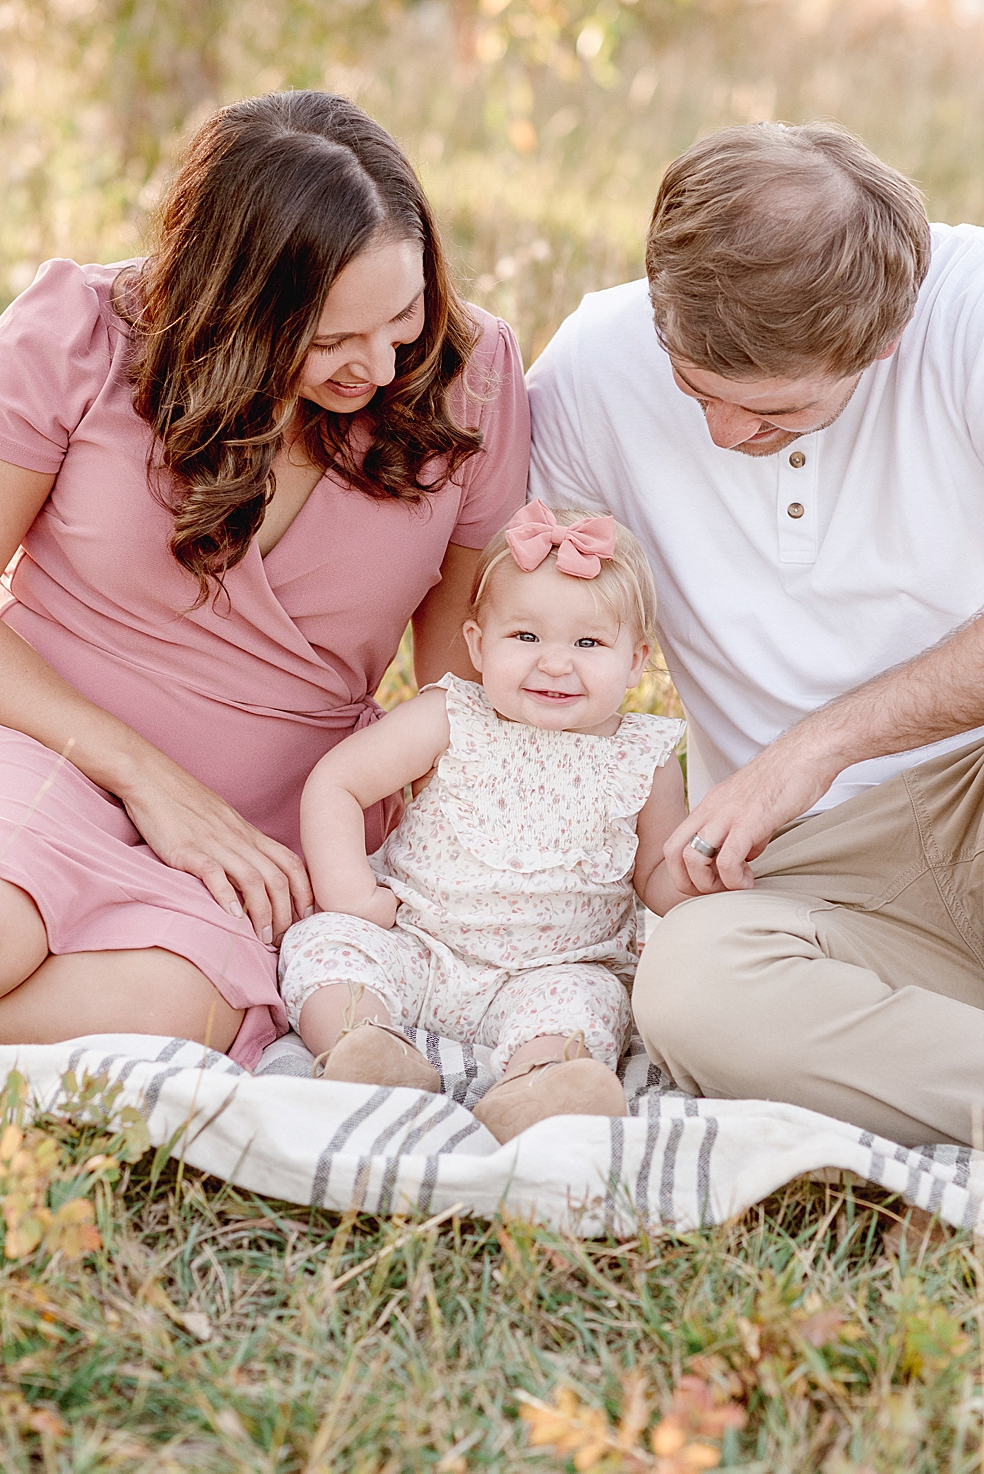 Mom dad and baby girl sitting on a blanket in the grass | Photo by Jessica Lee Photography